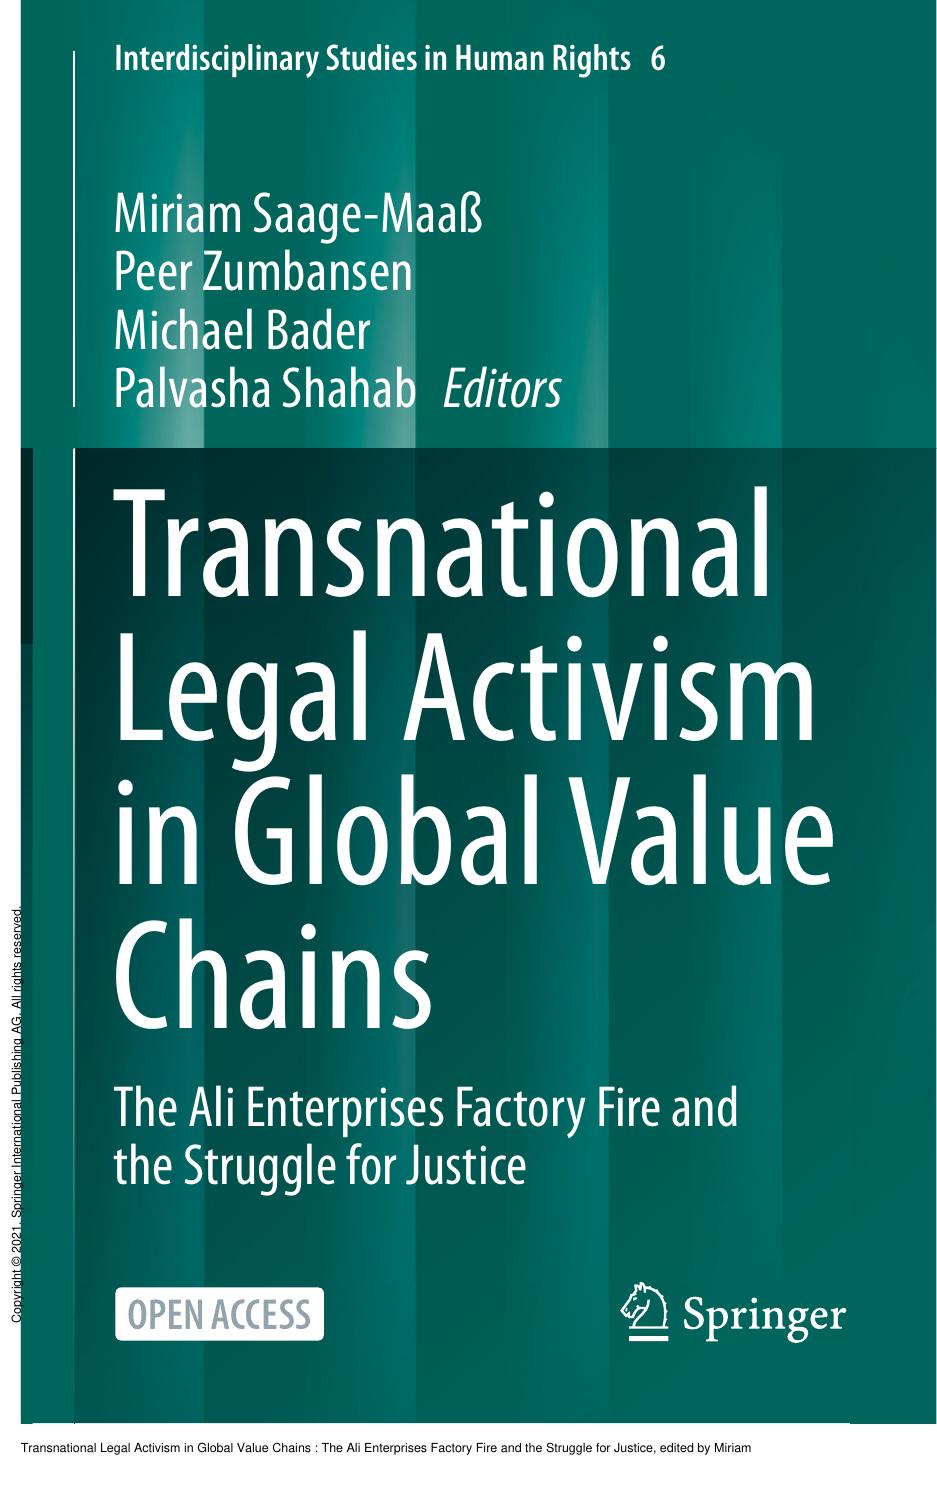 Transnational Legal Activism in Global Value Chains : The Ali Enterprises Factory Fire and the Struggle for Justice by Miriam Saage-Maaß; Peer Zumbansen; Michael Bader; Palvasha Shahab